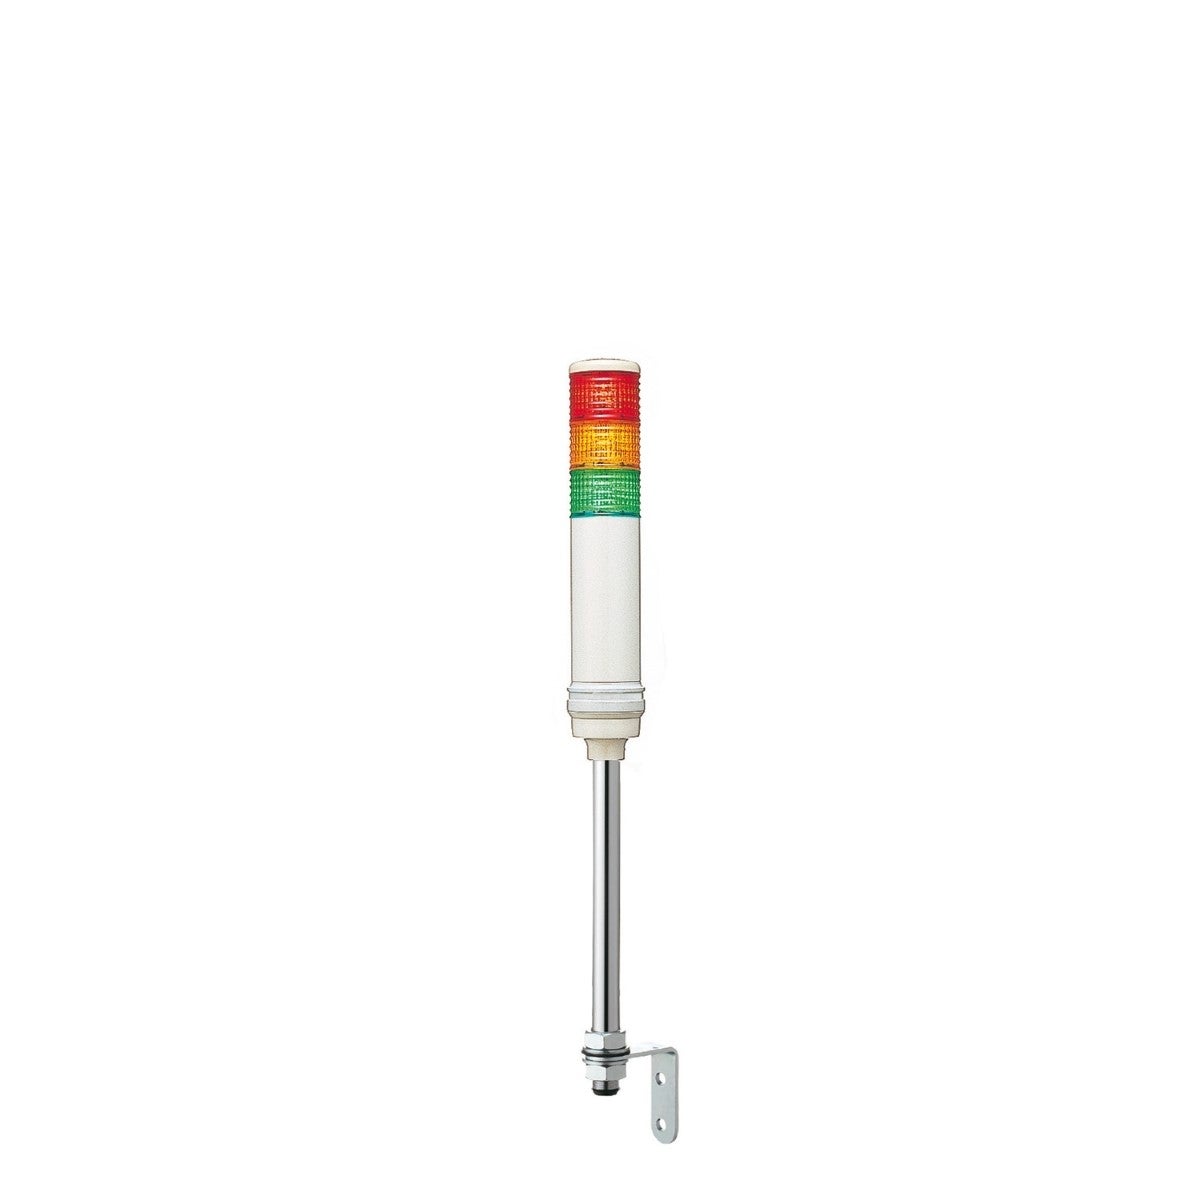 Harmony XVC, Monolithic precabled tower light, plastic, red orange green, Ø60, tube mounting, steady or flashing, buzzer, IP23, 100...240 V AC